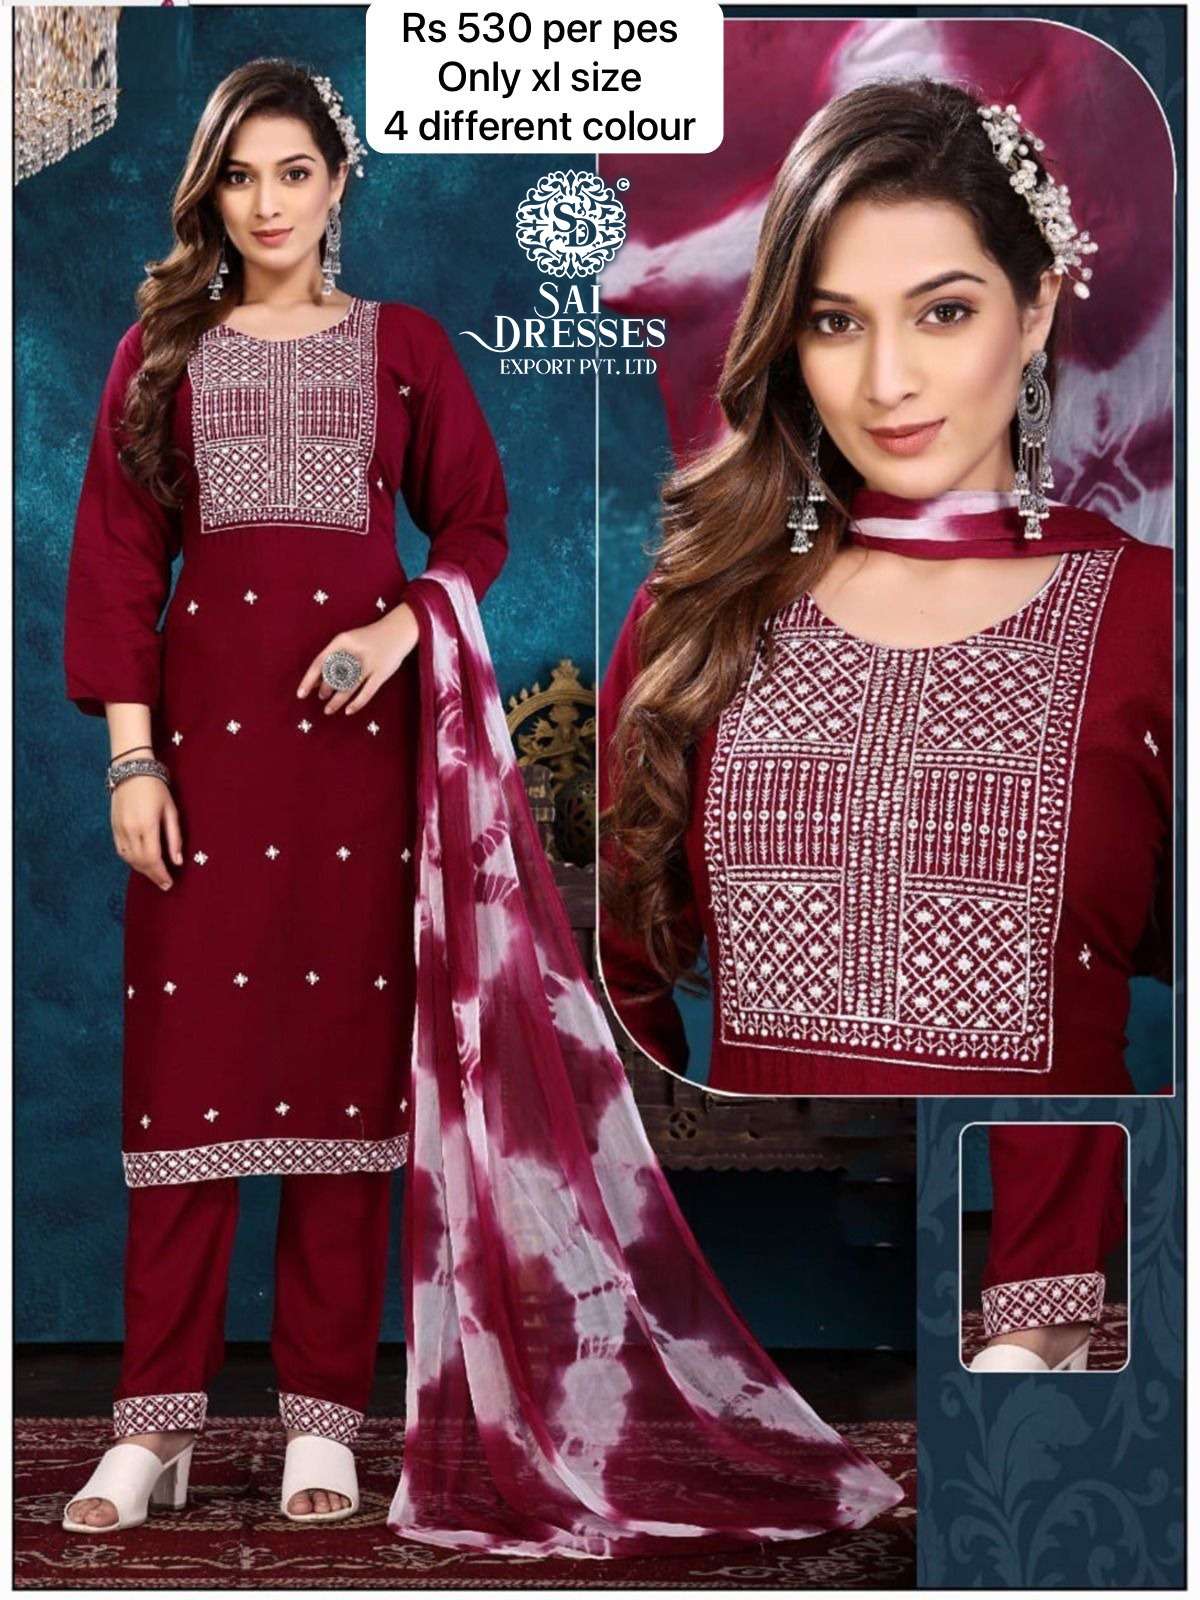 SAI DRESSES PRESENT D.NO 2025 READY TO DAILY WEAR PANT STYLE DESIGNER 3 PIECE CONCEPT COMBO COLLECTION IN WHOLESALE RATE IN SURAT